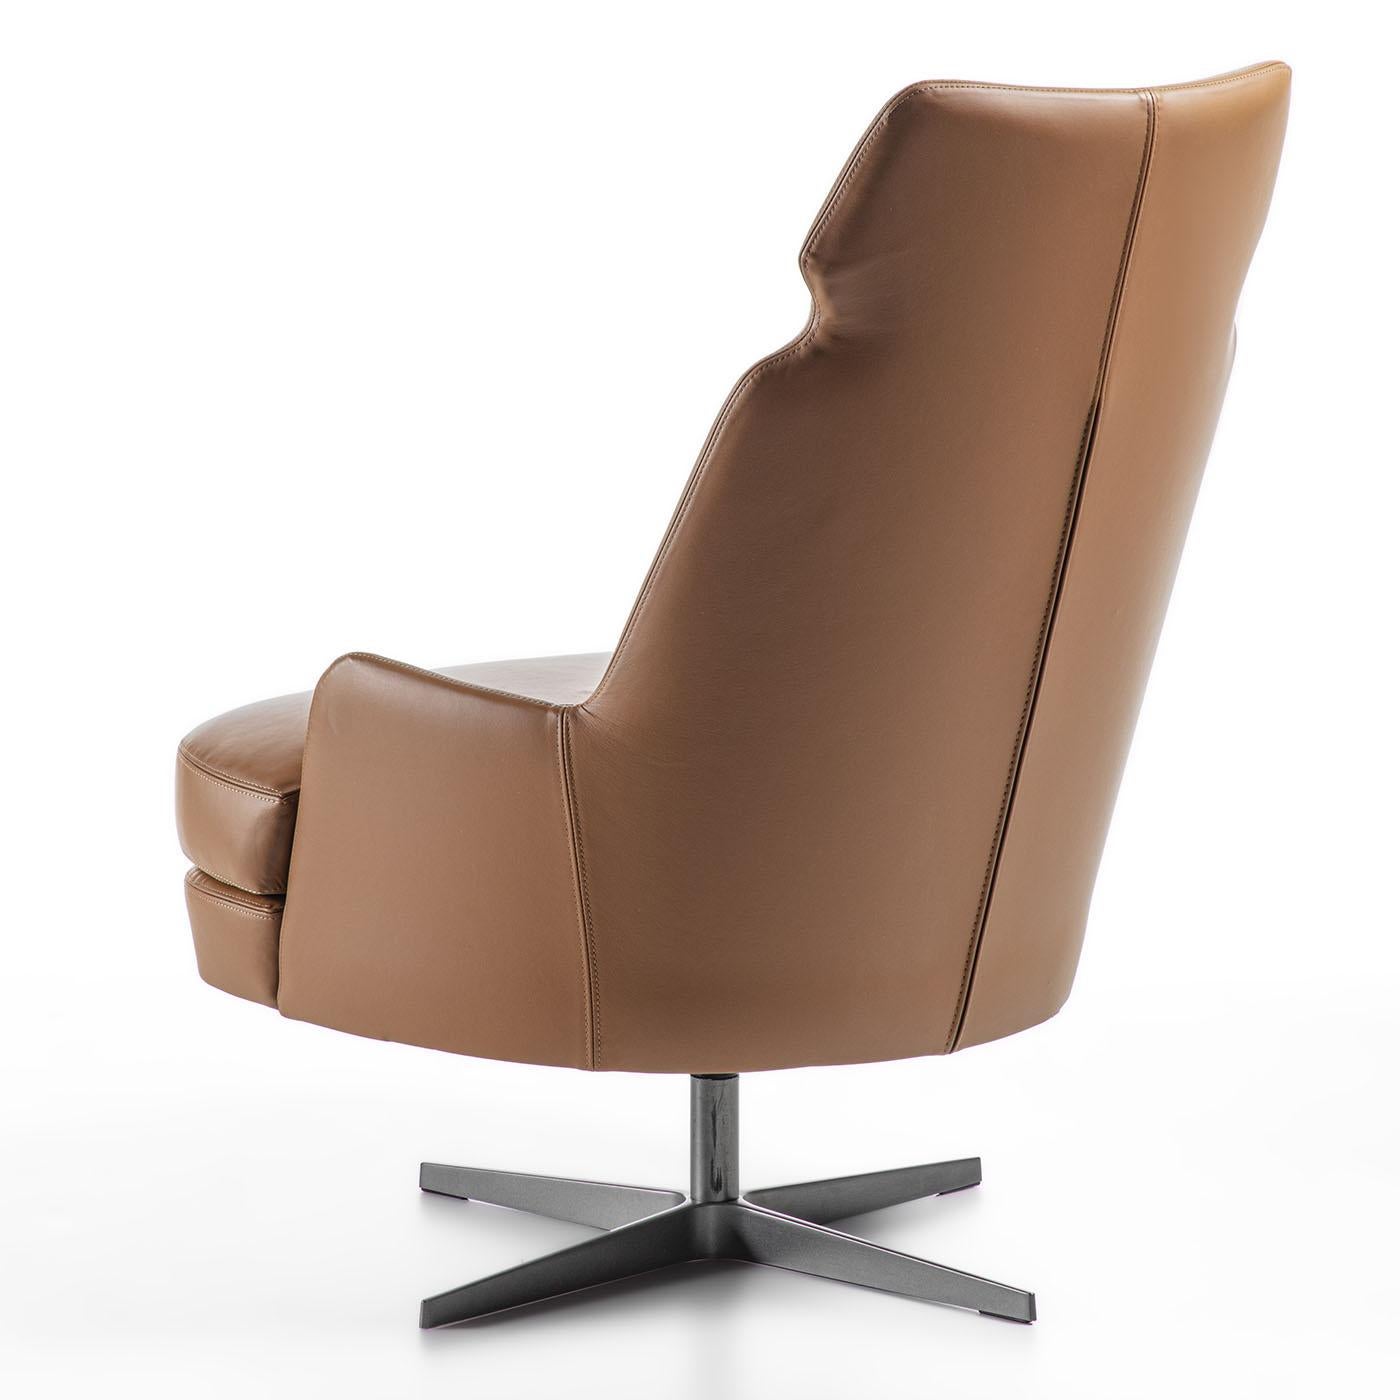 Bergere is inspired by the particular curves of the Shape line. Equipped with reclining and swivel mechanism. Metal base in lead finish and structure upholstered in leather.